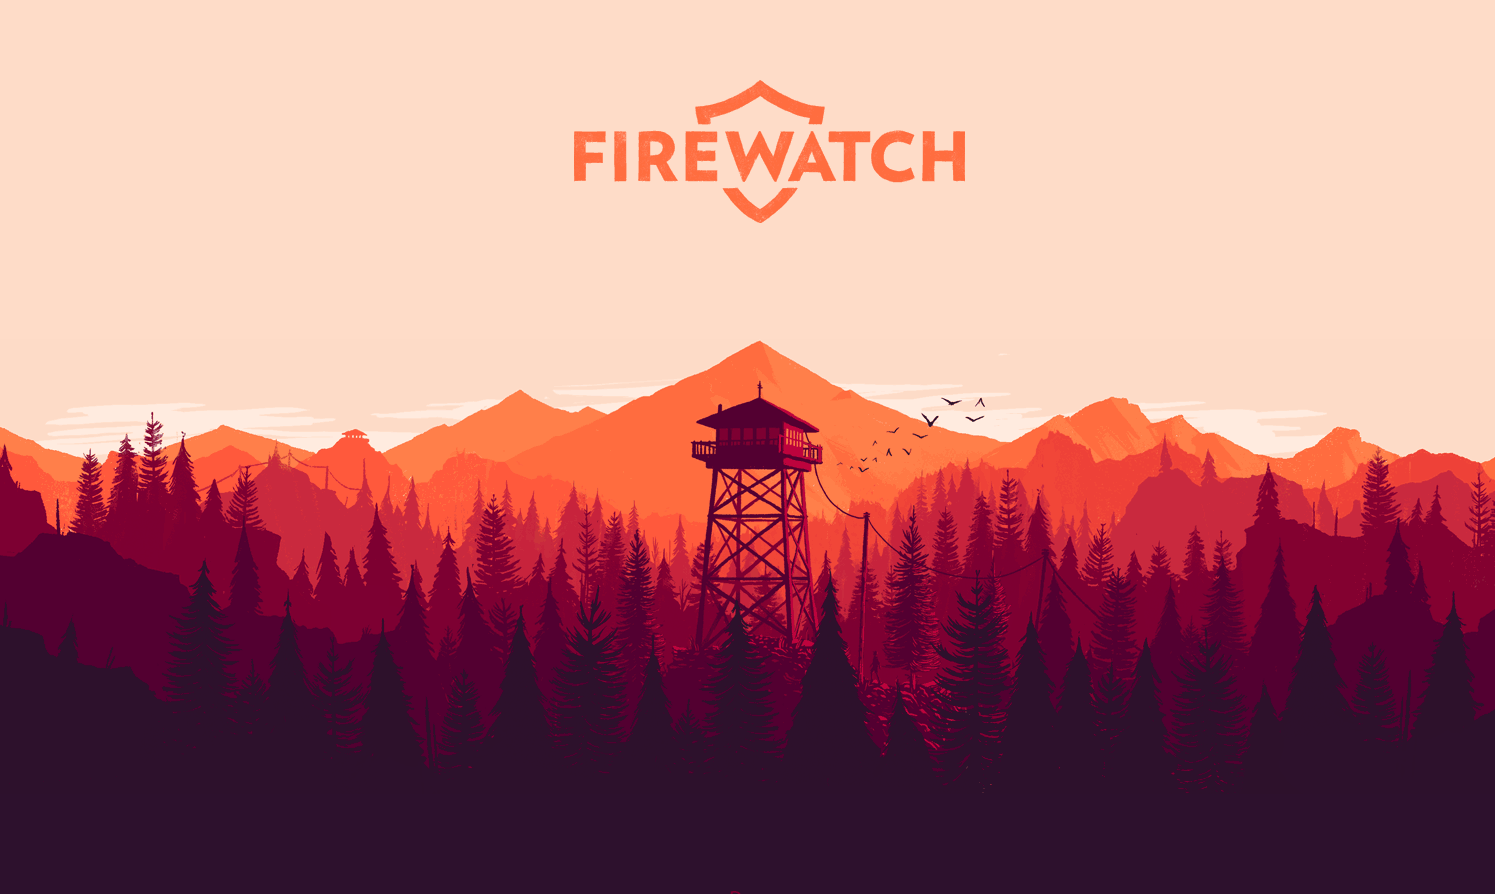 “Firewatch” Release Date Announced - Developers putting on the finishing touches